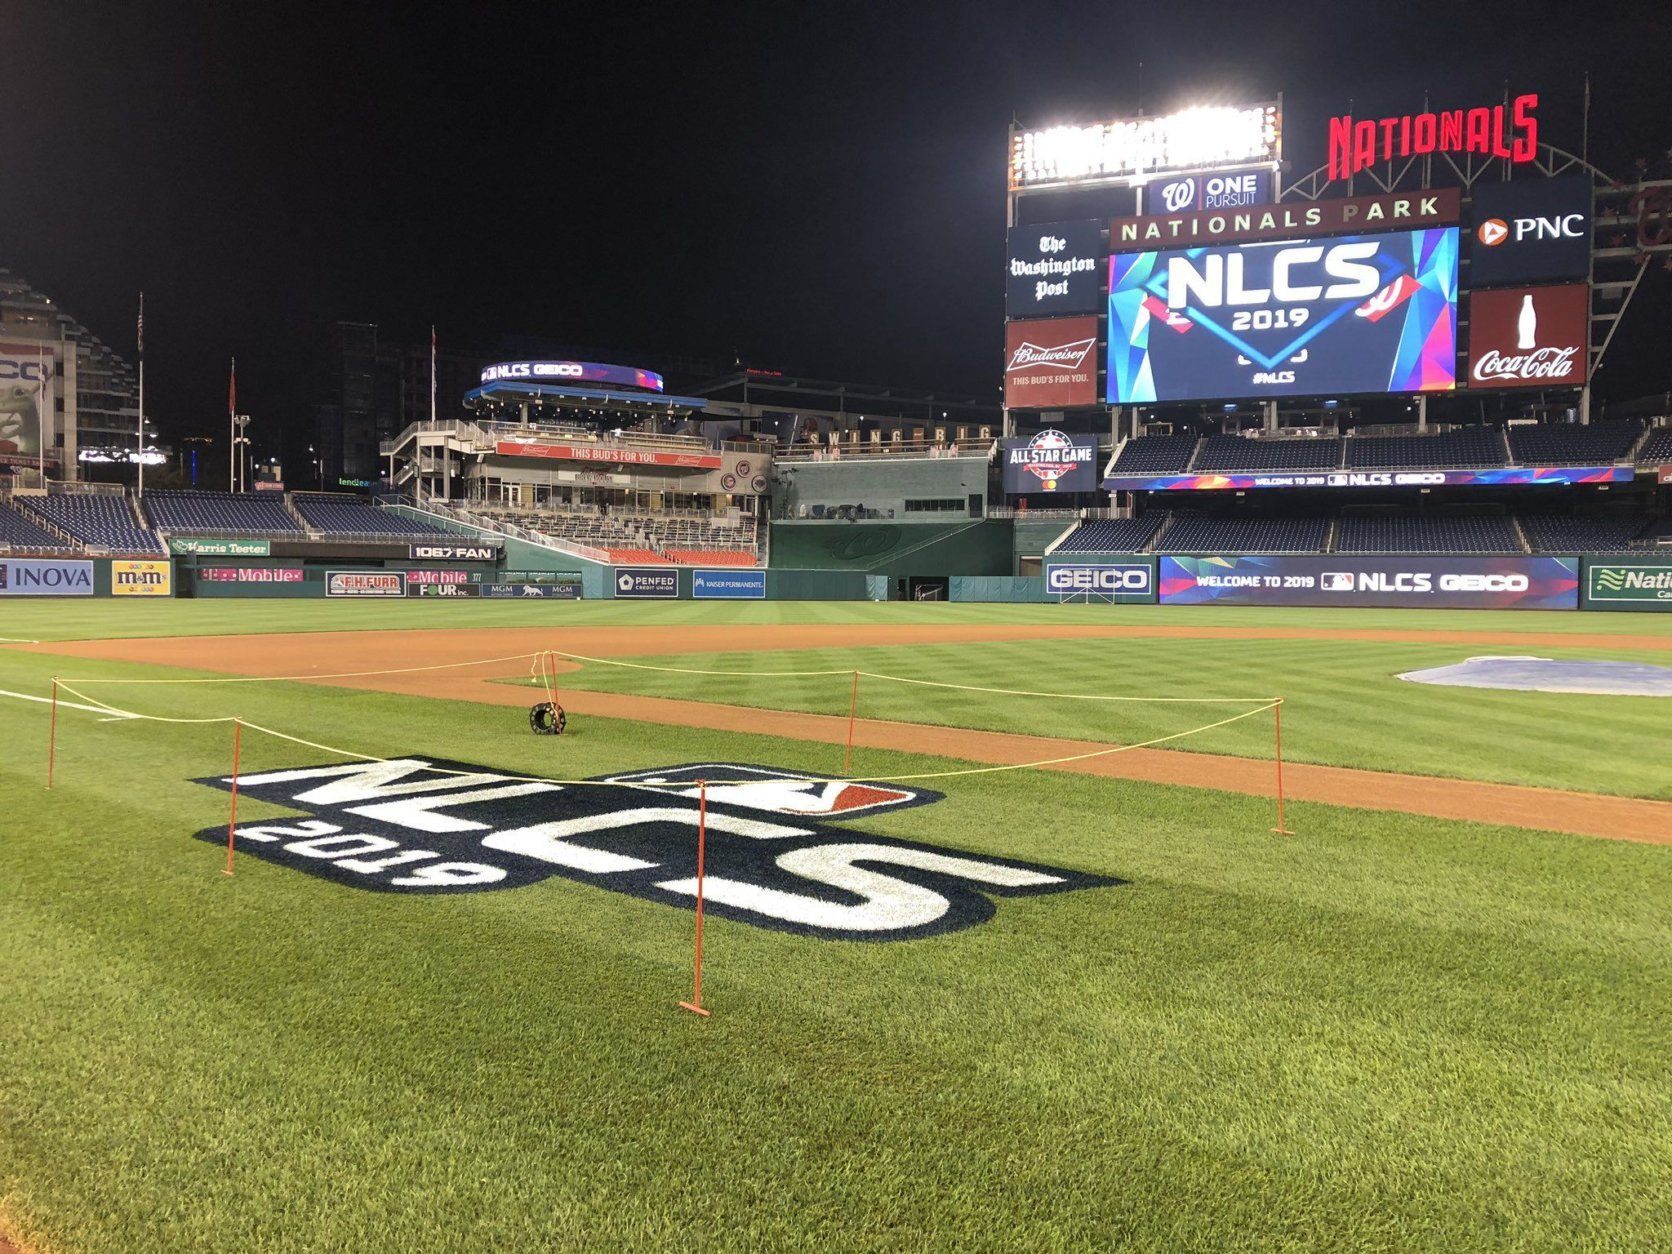 At Nationals Park, first game in Capital Crossover series is a home run